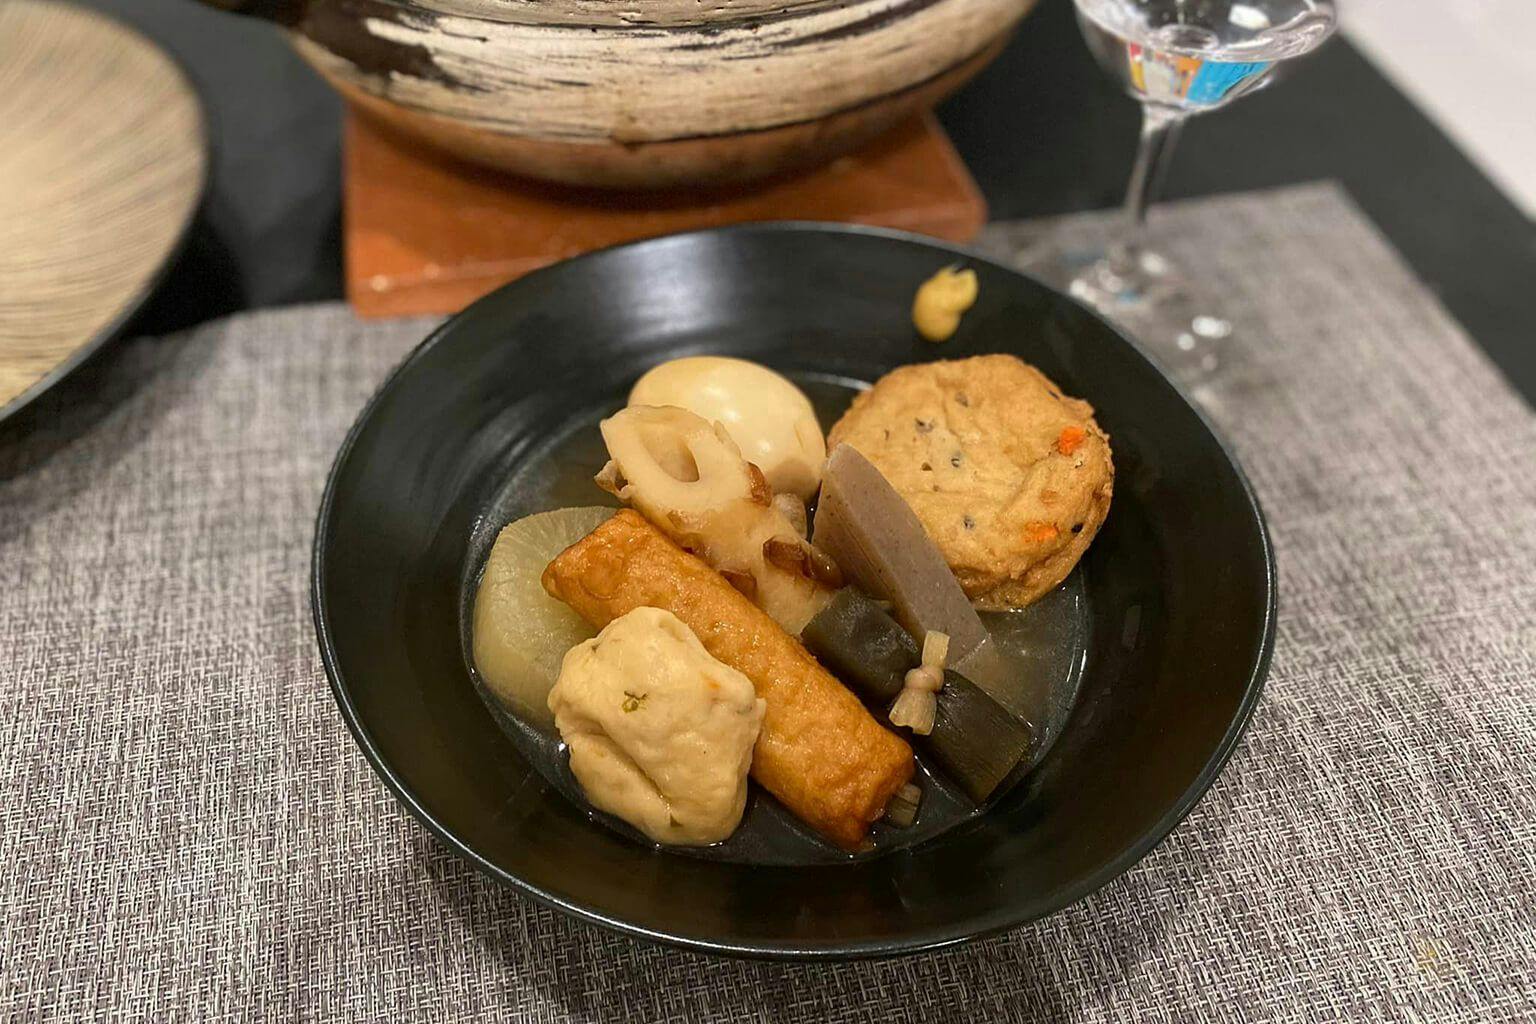 Serving Oden with karashi on the plate